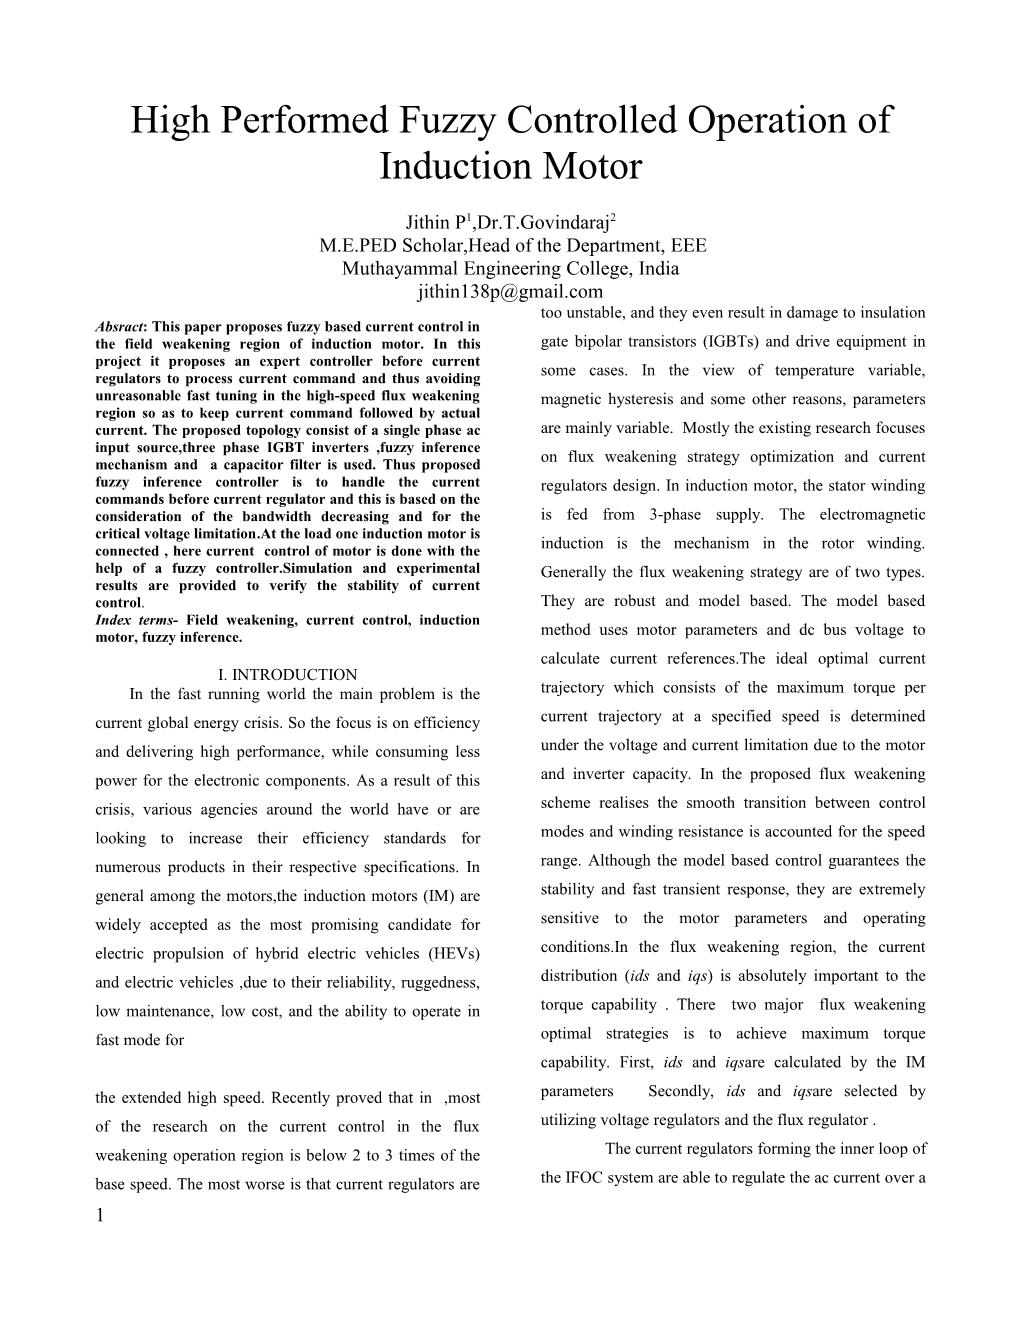 High Performed Fuzzy Controlled Operation of Induction Motor